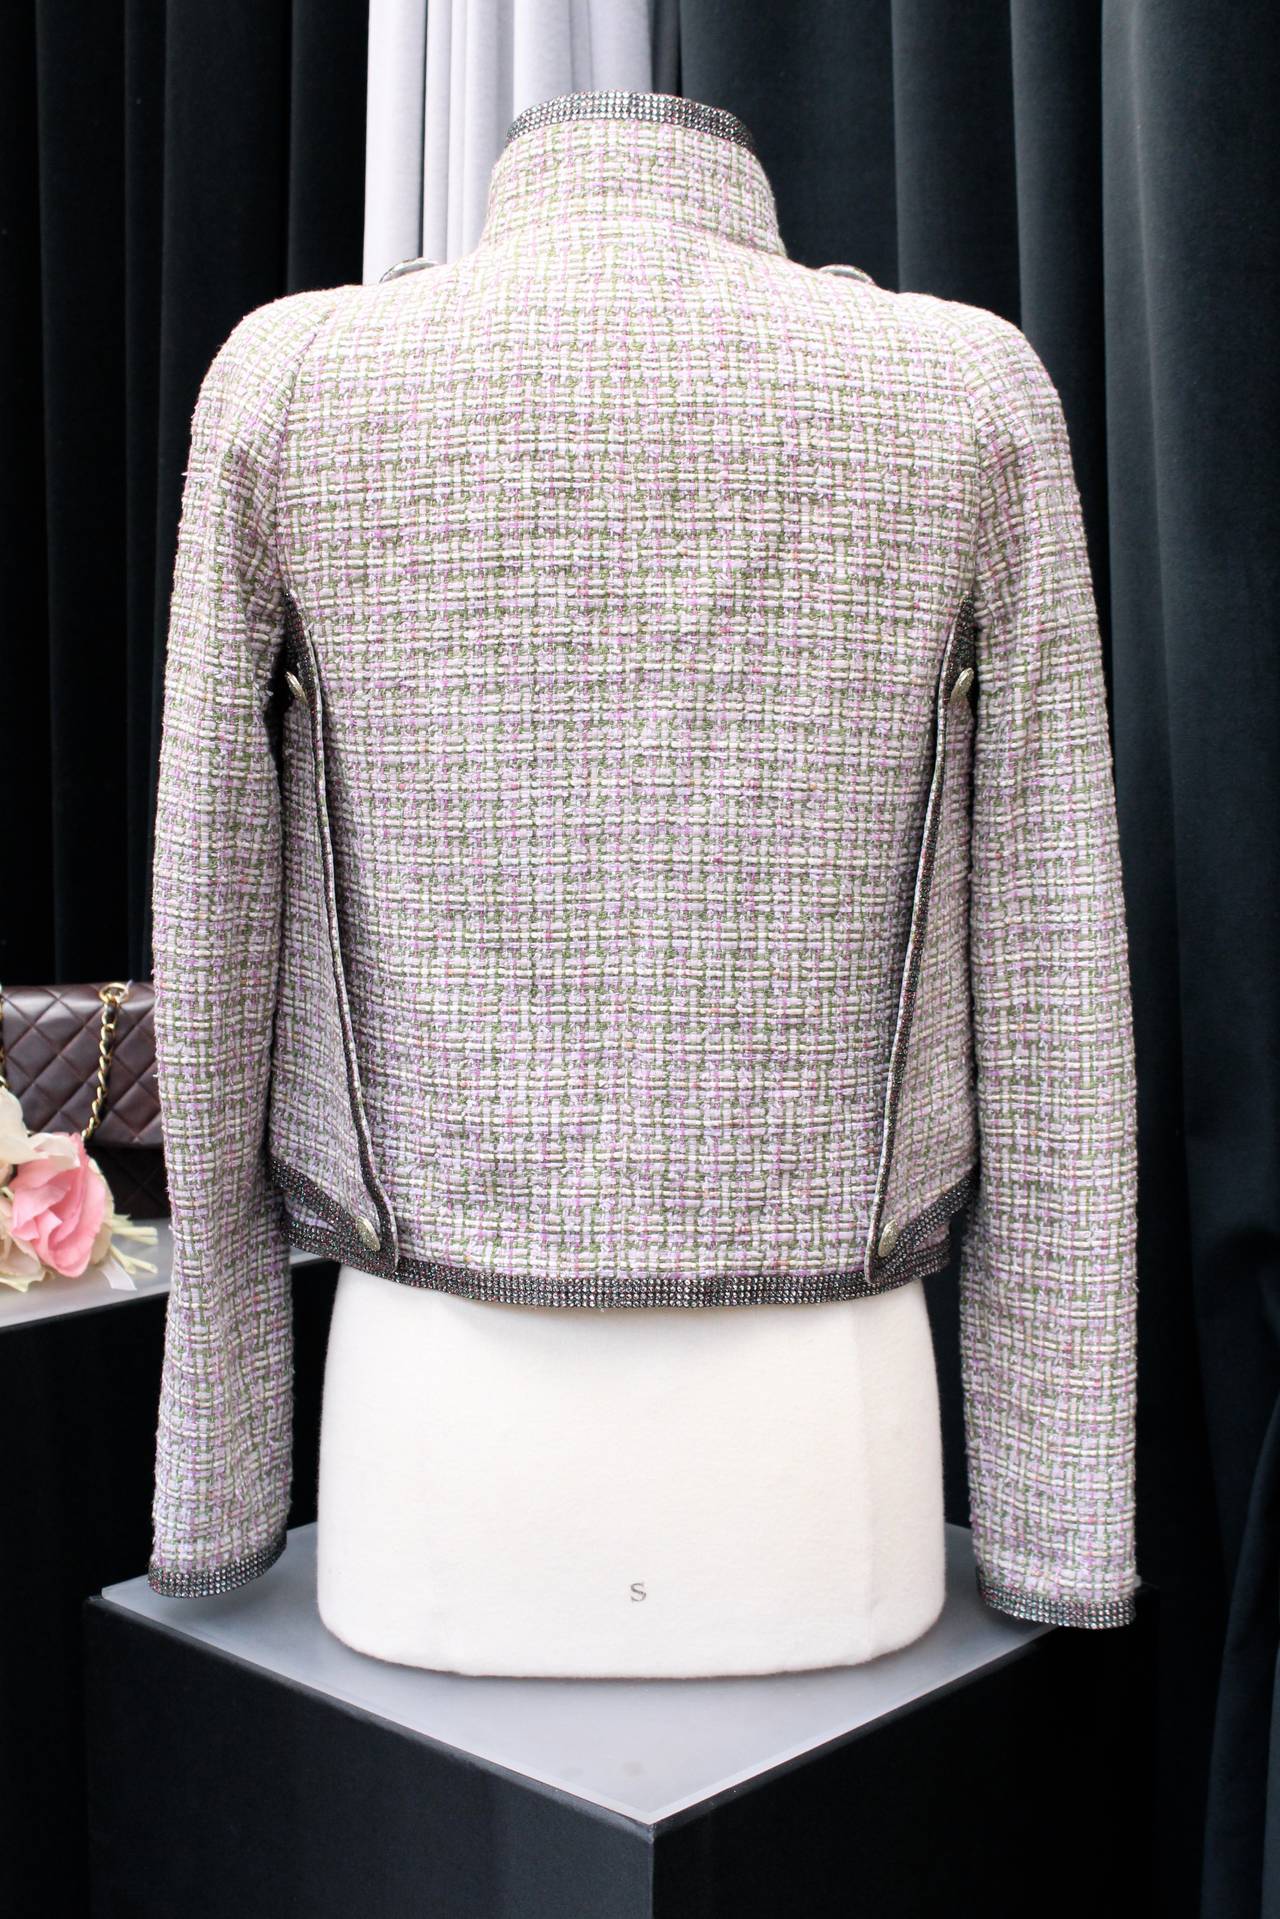 Chanel jacket from the 2011 spring collection, Look 27 of the runway, composed of light pink and green tweed adorned with strips of rhinestones embroideries and silver metal and enamel buttons.
The jacket is constructed with several elements 